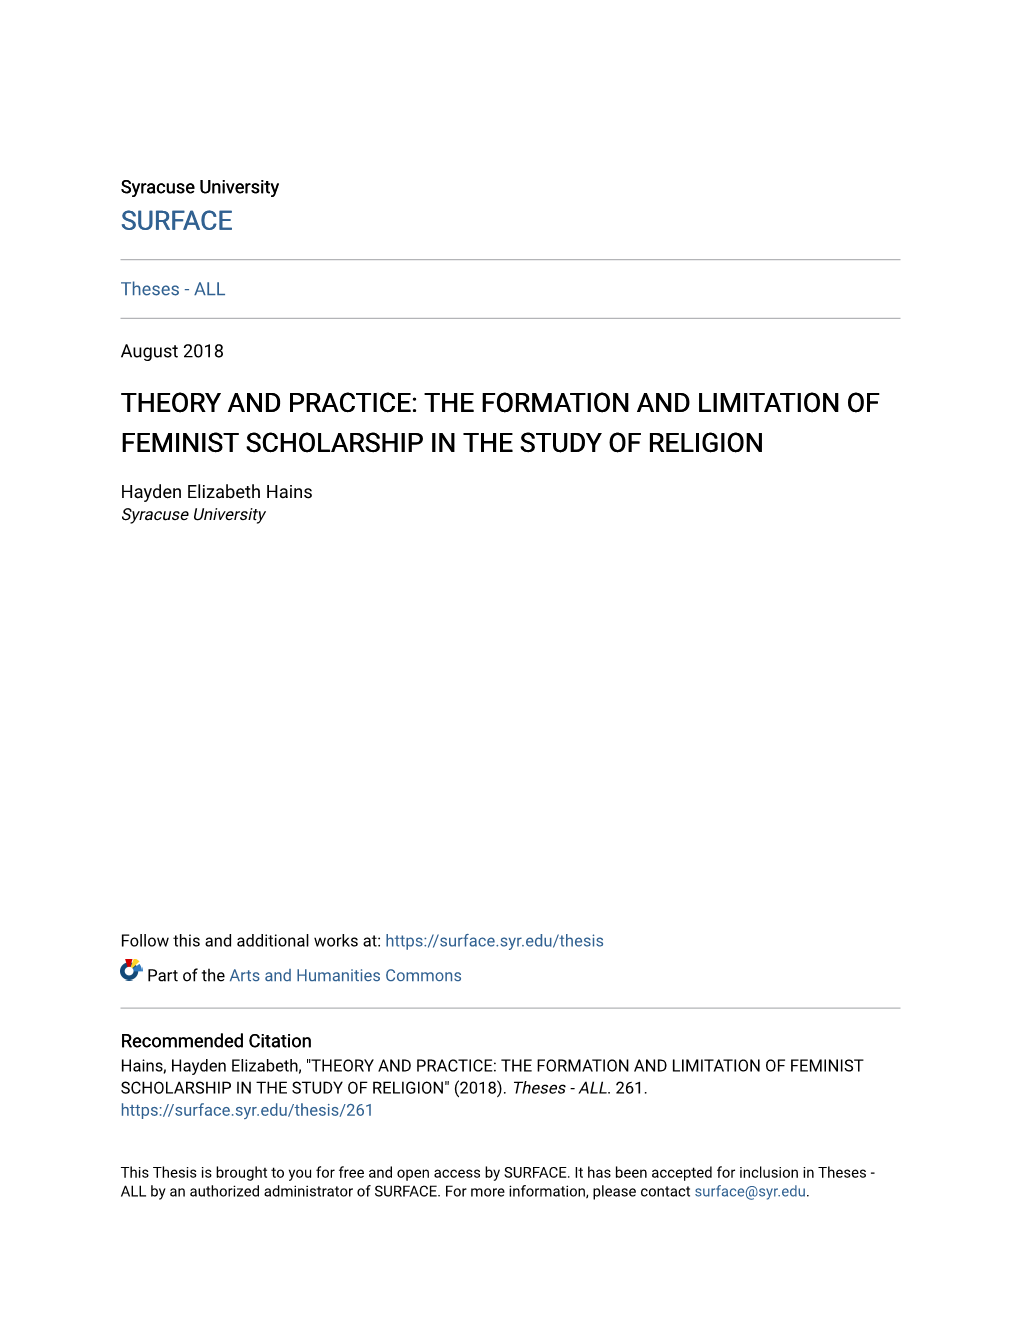 The Formation and Limitation of Feminist Scholarship in the Study of Religion